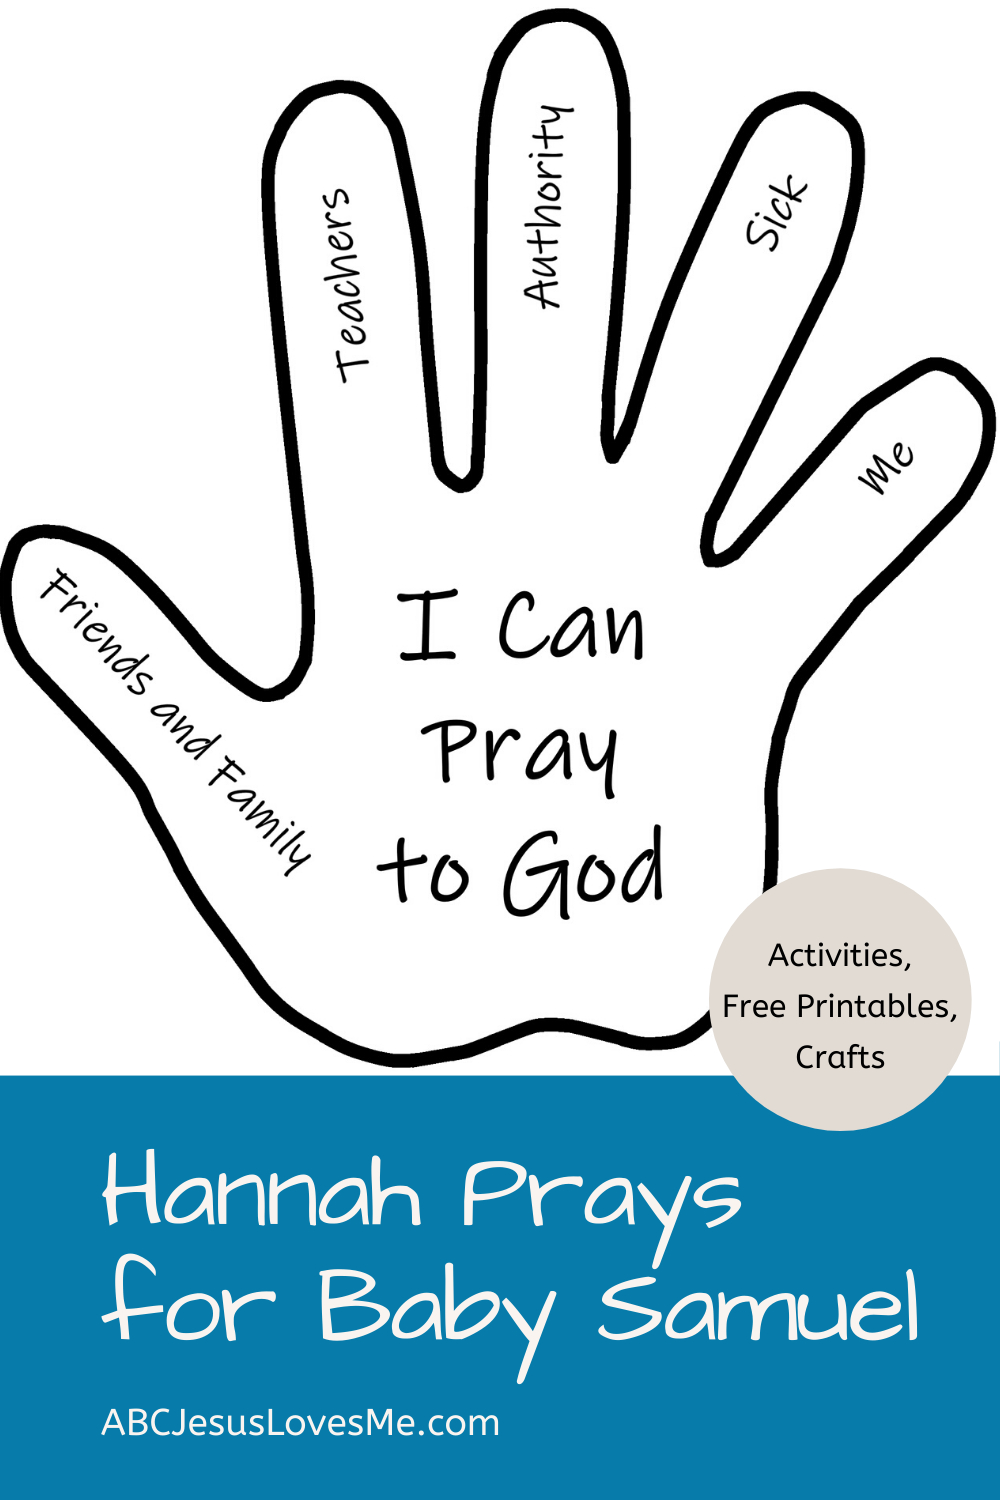 Hannah And Baby Samuel Activities For Kids for Free Printable Bible Crafts For Preschoolers